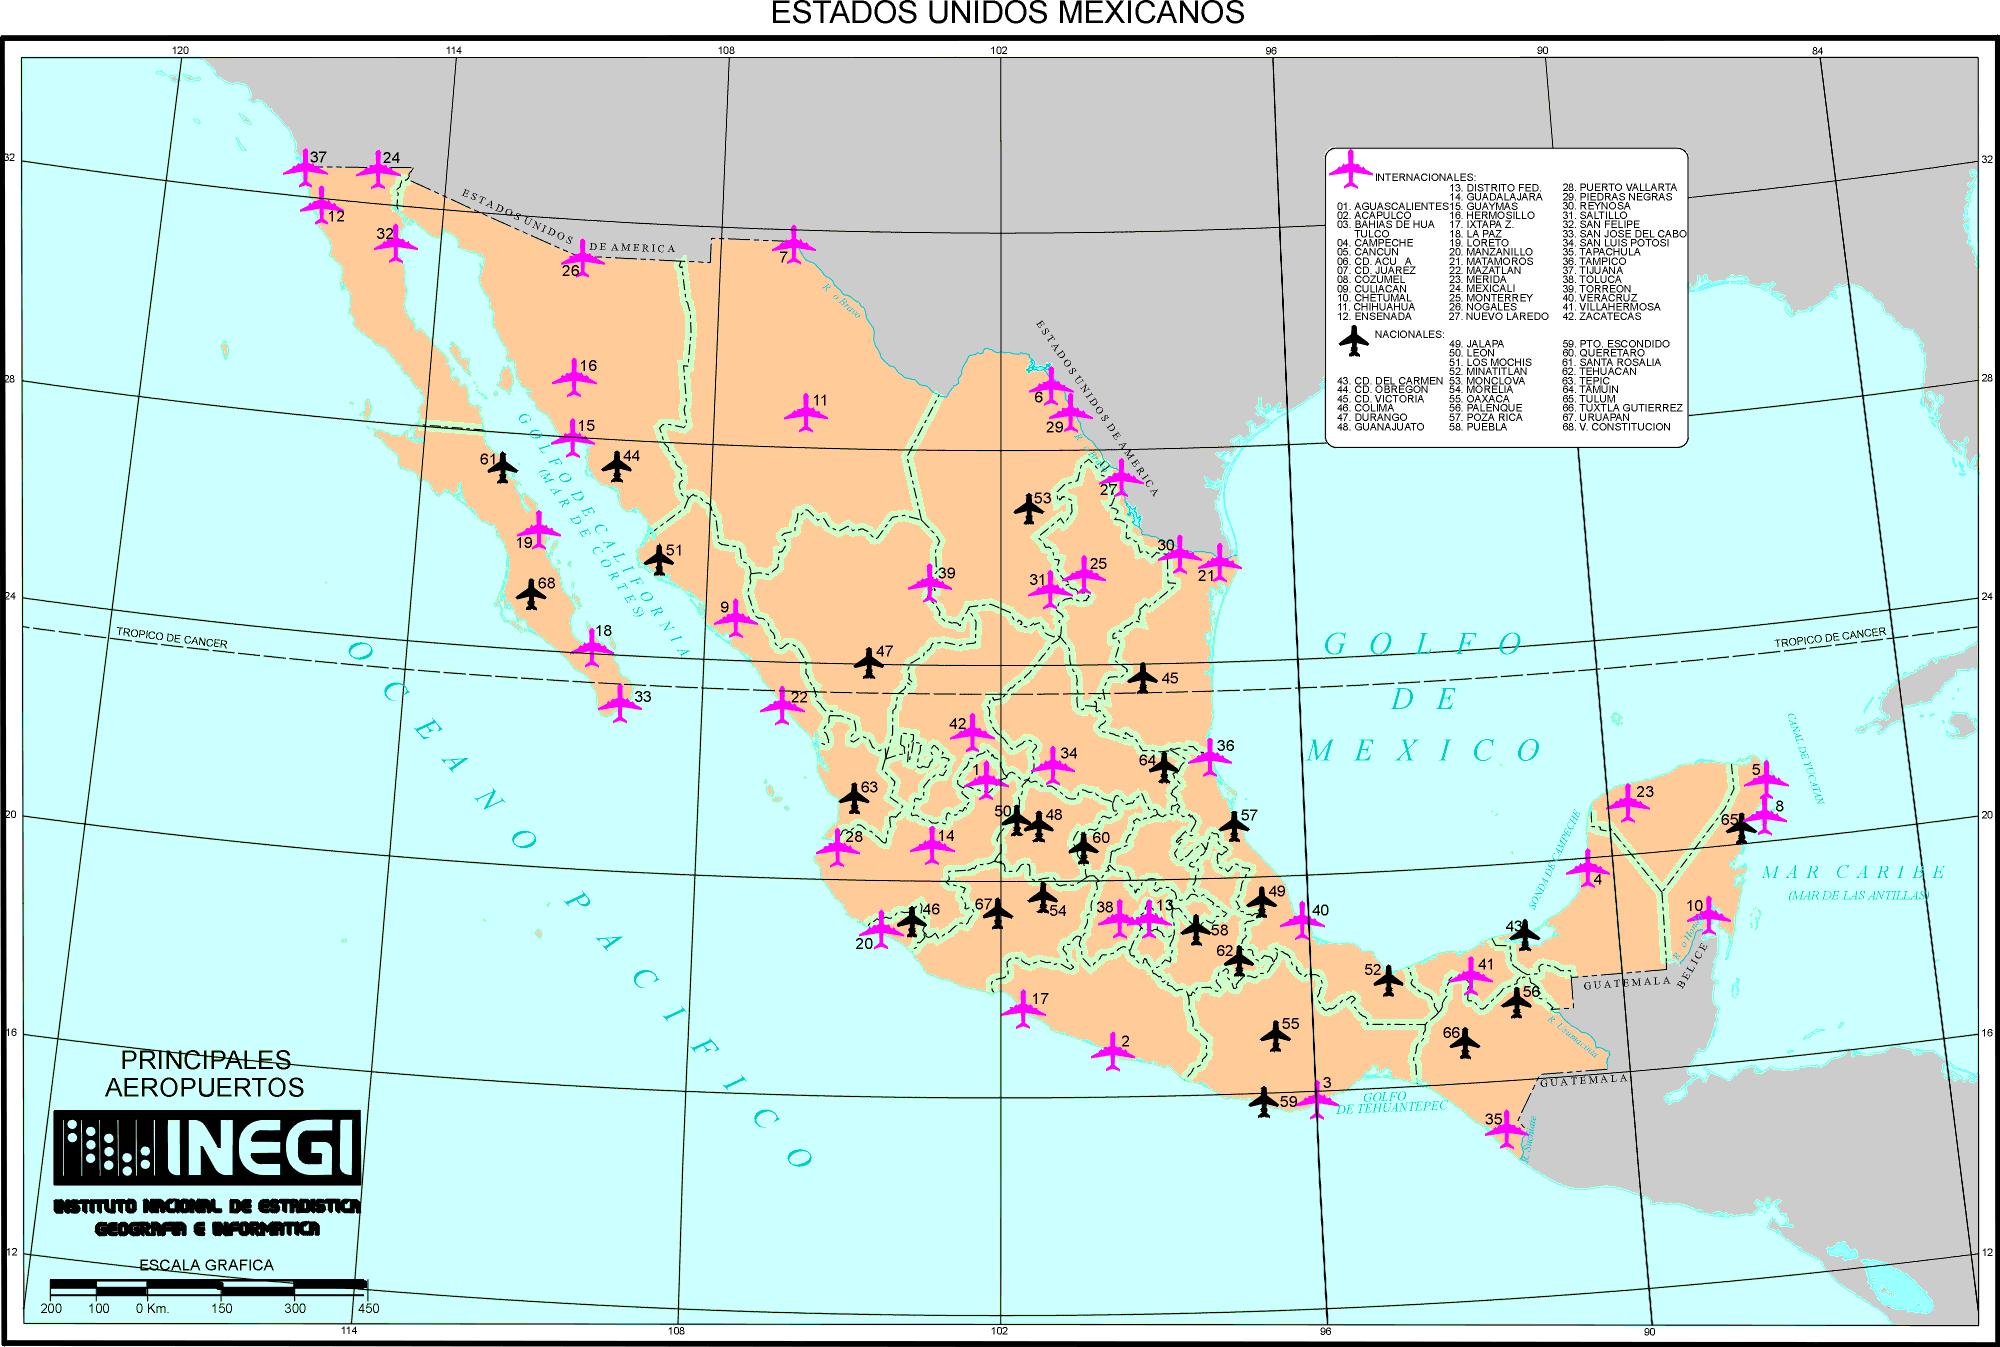 Mexico Airports Map 